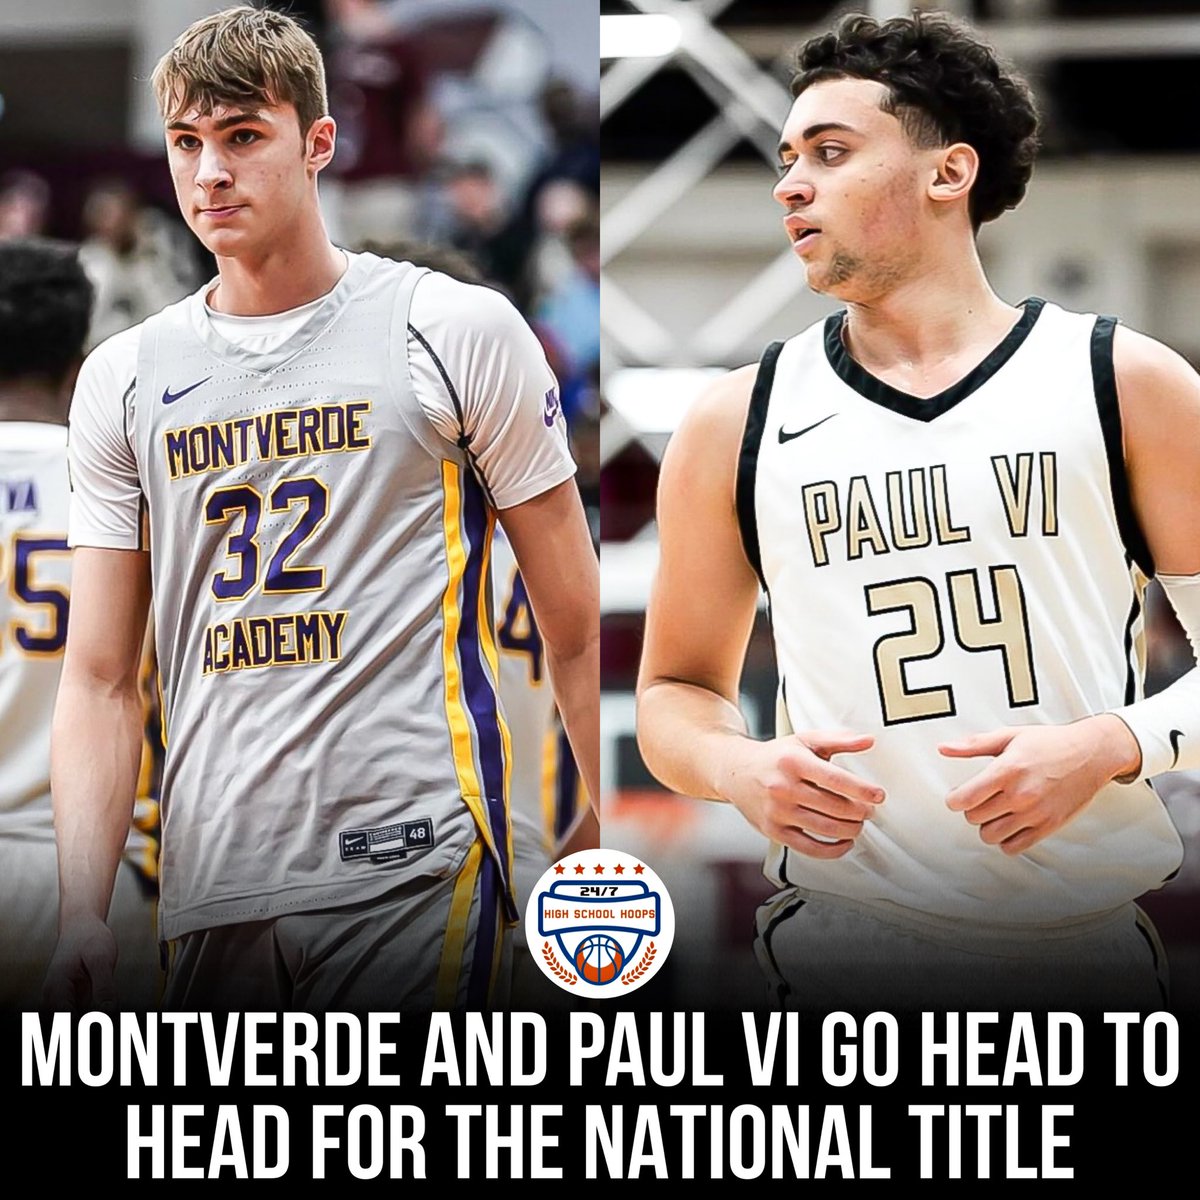 #1 Montverde Academy (FL) and #3 Paul VI (VA) battle for a #ChipotleNationals championship today at 12pm ET. The matchup features:

-Cooper Flagg (Duke)
-Derik Queen (Maryland)
-Liam McNeeley (#11 in ESPN100)
-Asa Newell (Georgia)
-Pat Ngongba (Duke)
-Rob Wright III (Baylor)